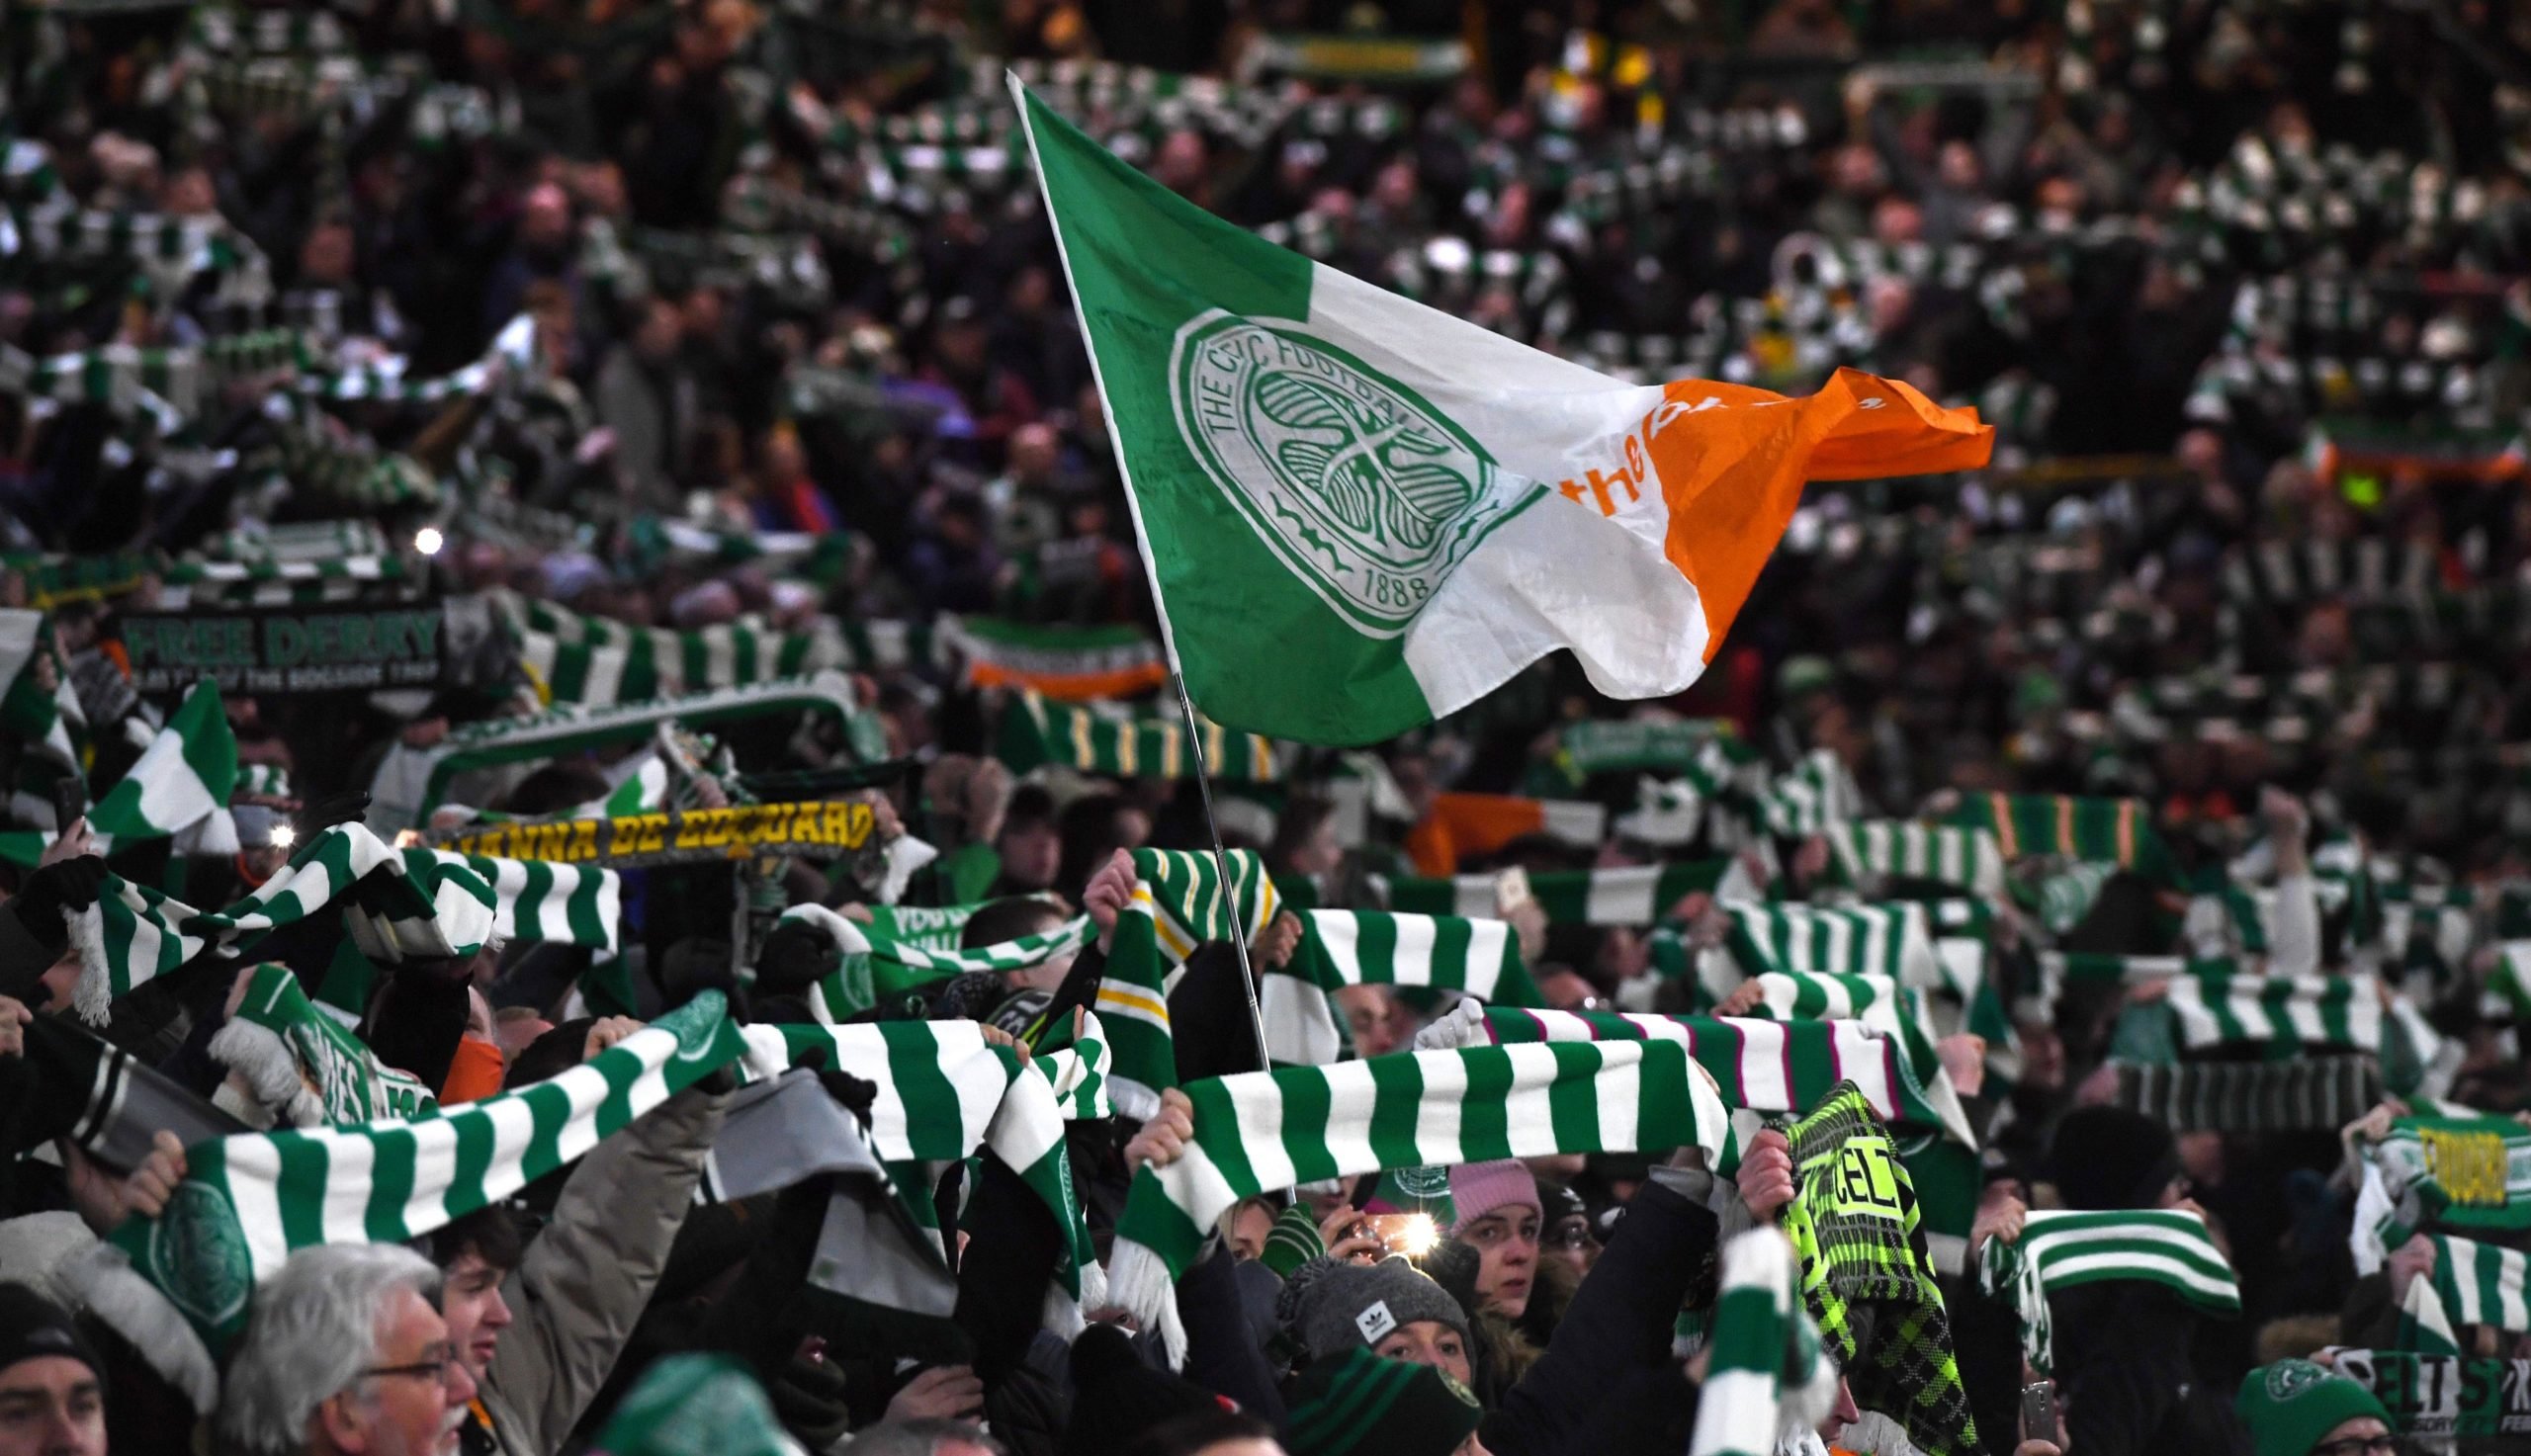 Celtic set for meeting with fan group after interim financial results - will review status finally be known?